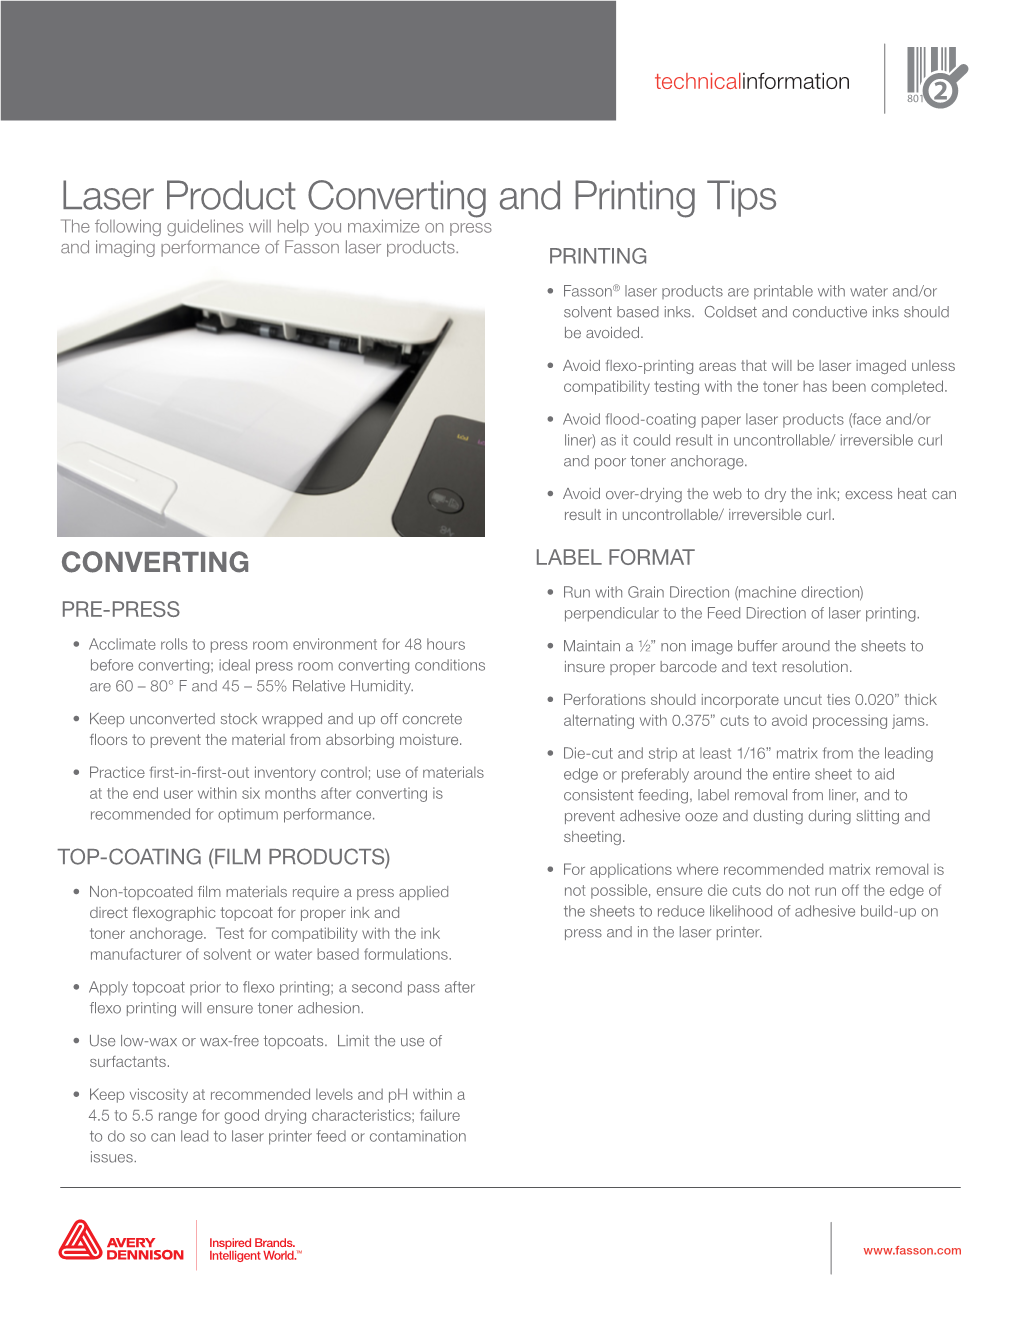 Laser Product Converting and Printing Tips the Following Guidelines Will Help You Maximize on Press and Imaging Performance of Fasson Laser Products